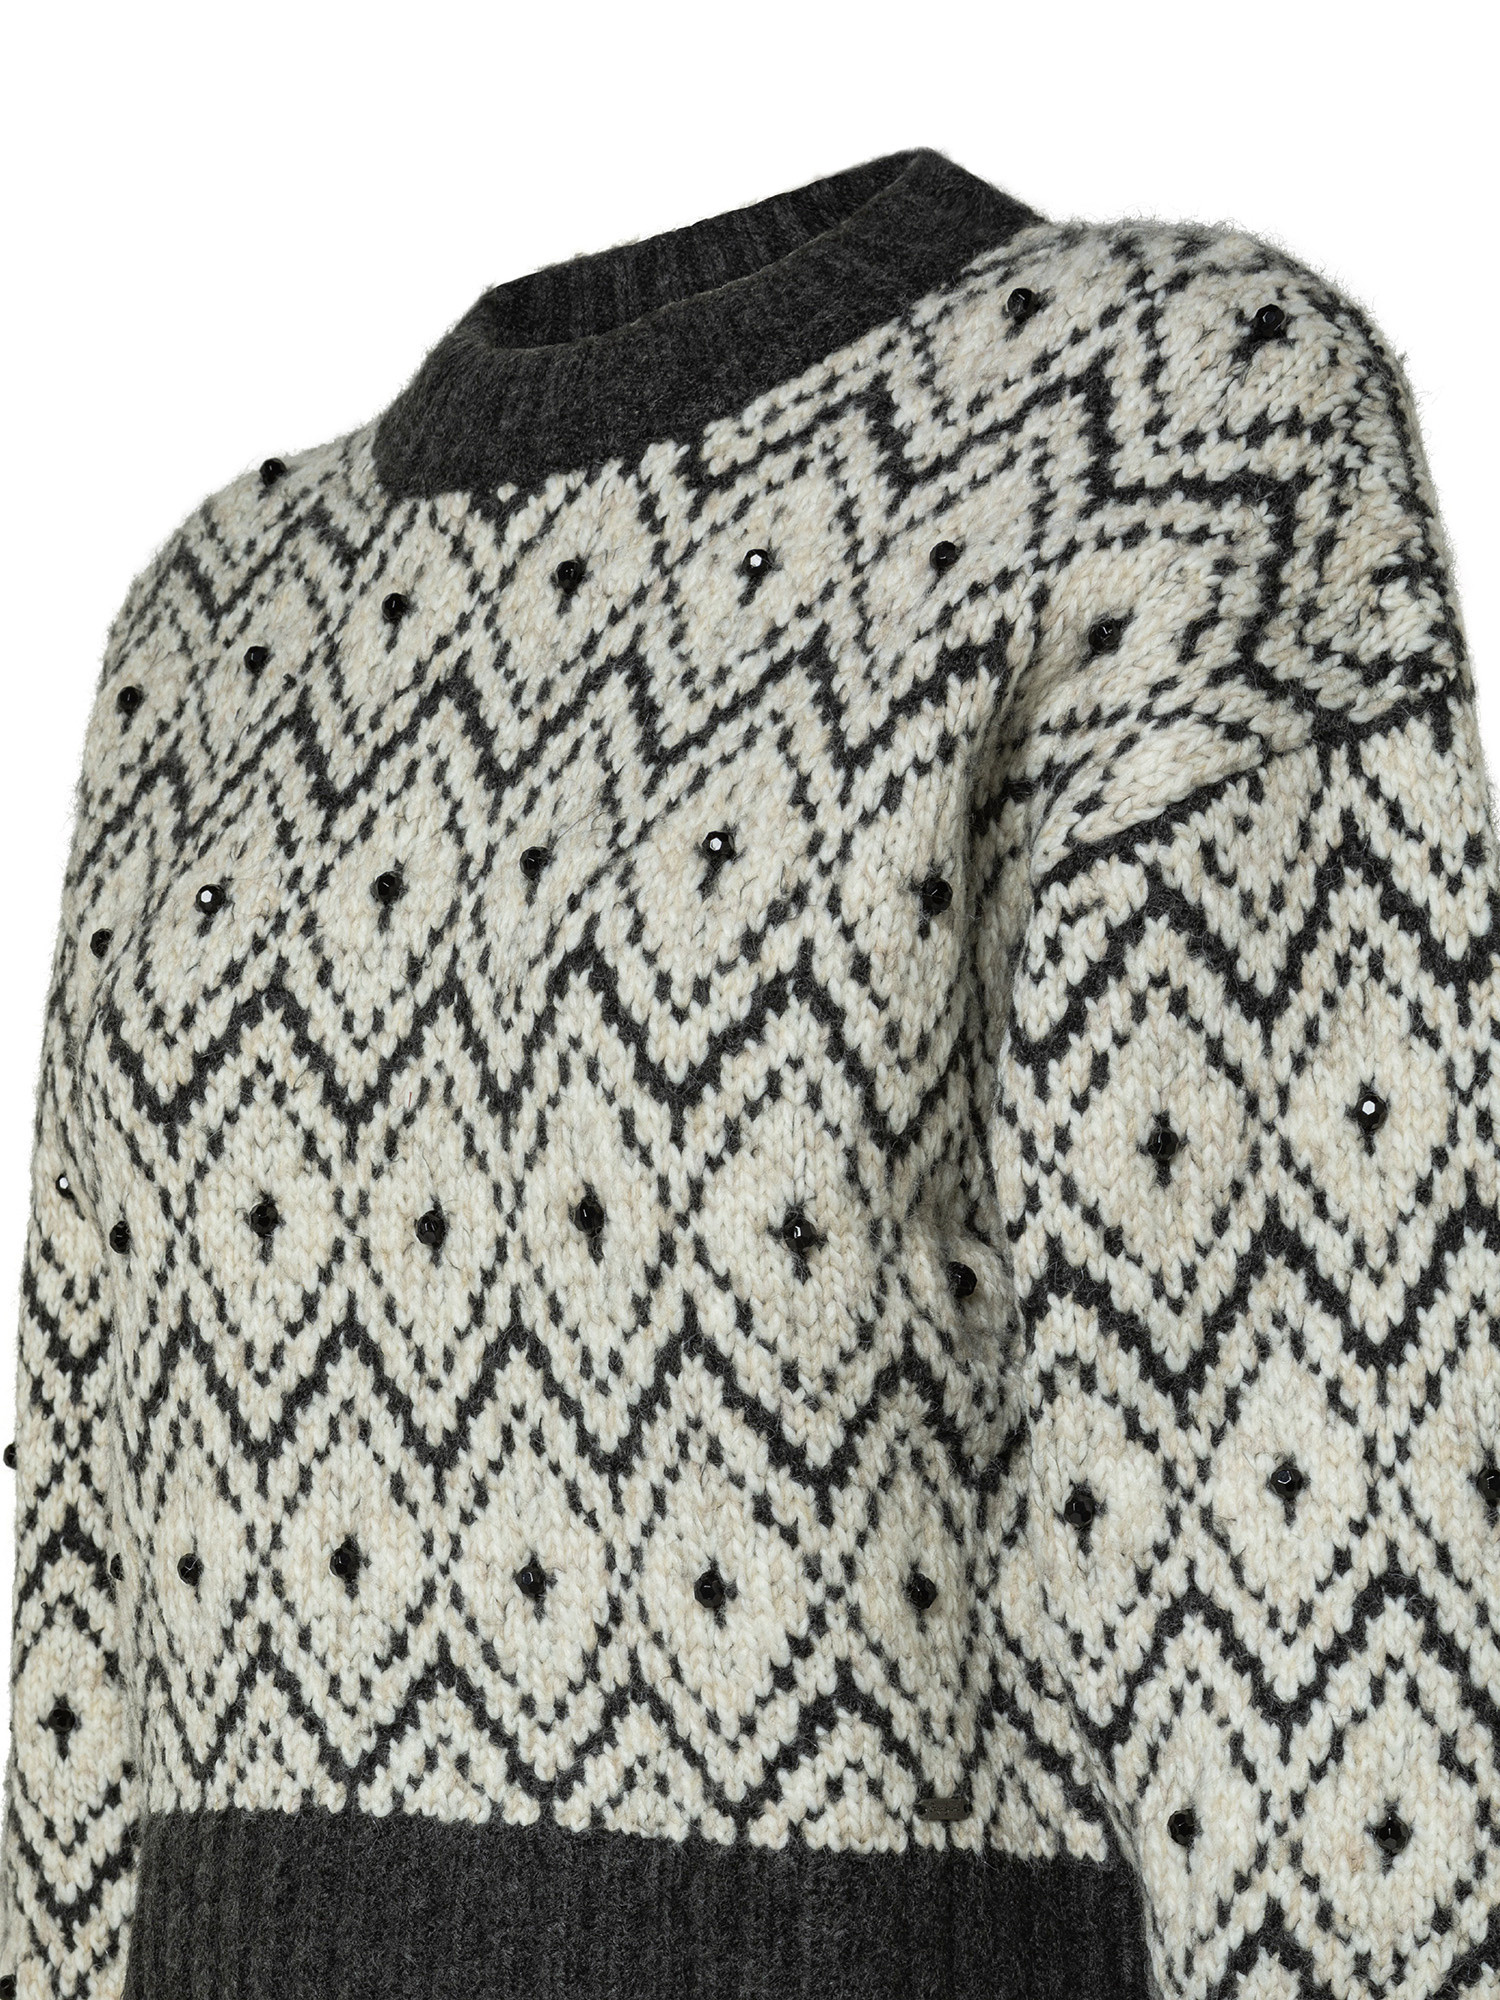 Bexa jacquard pullover, Multicolor, large image number 2